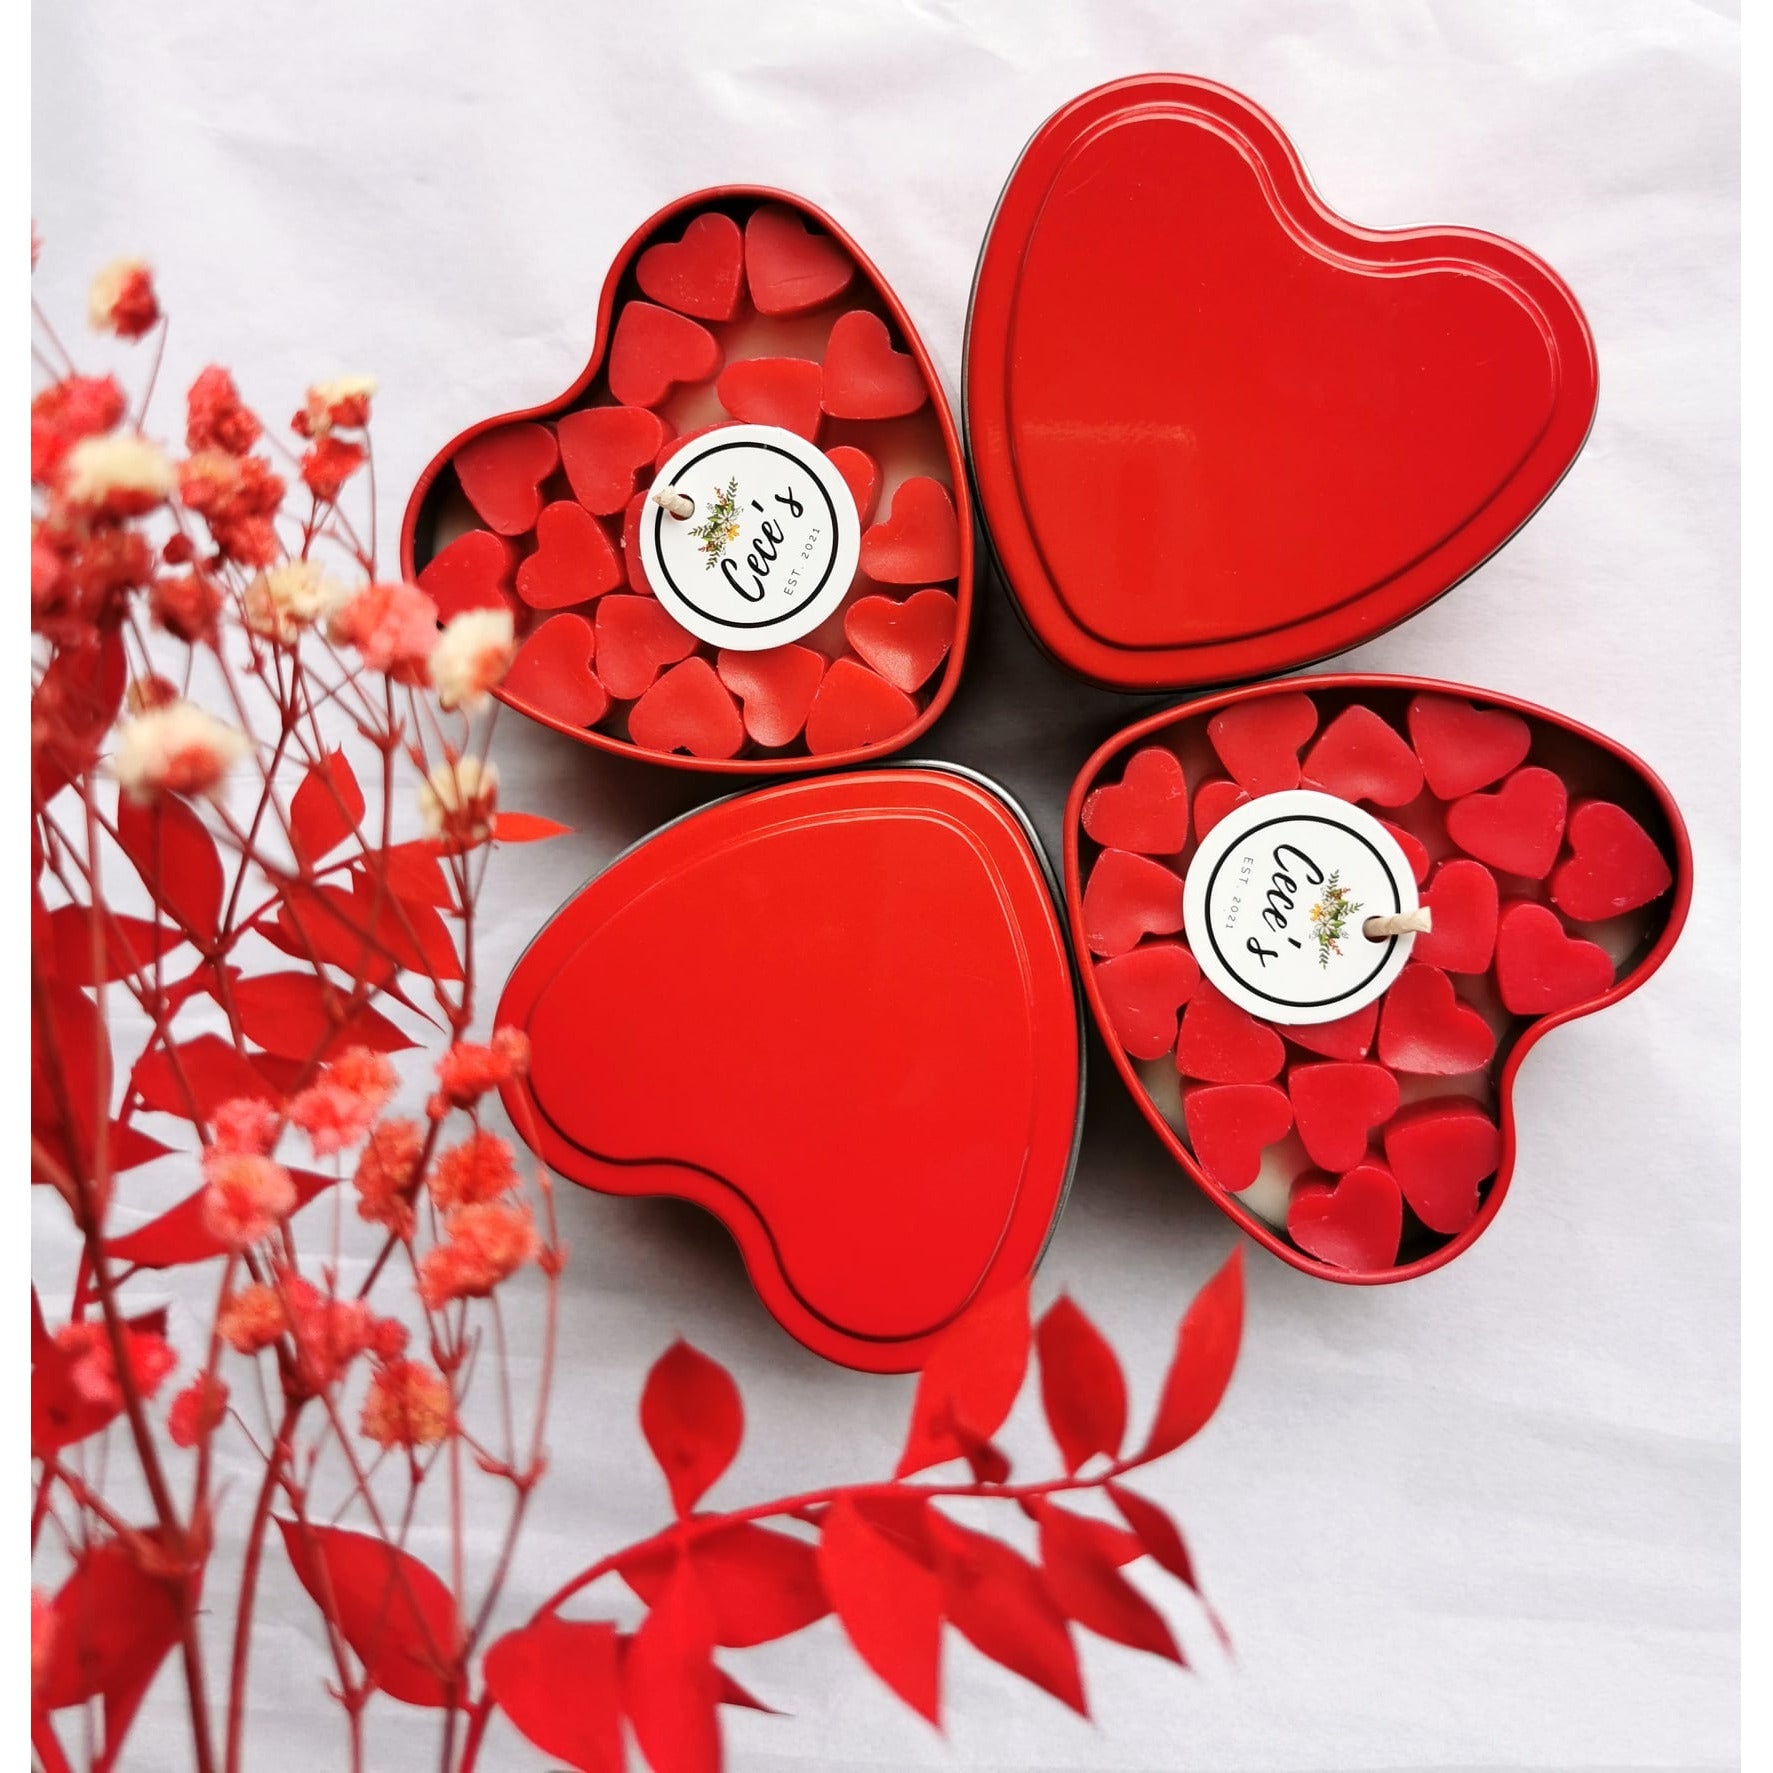 Red love heart tin with heart shaped candle and mini red heart melts